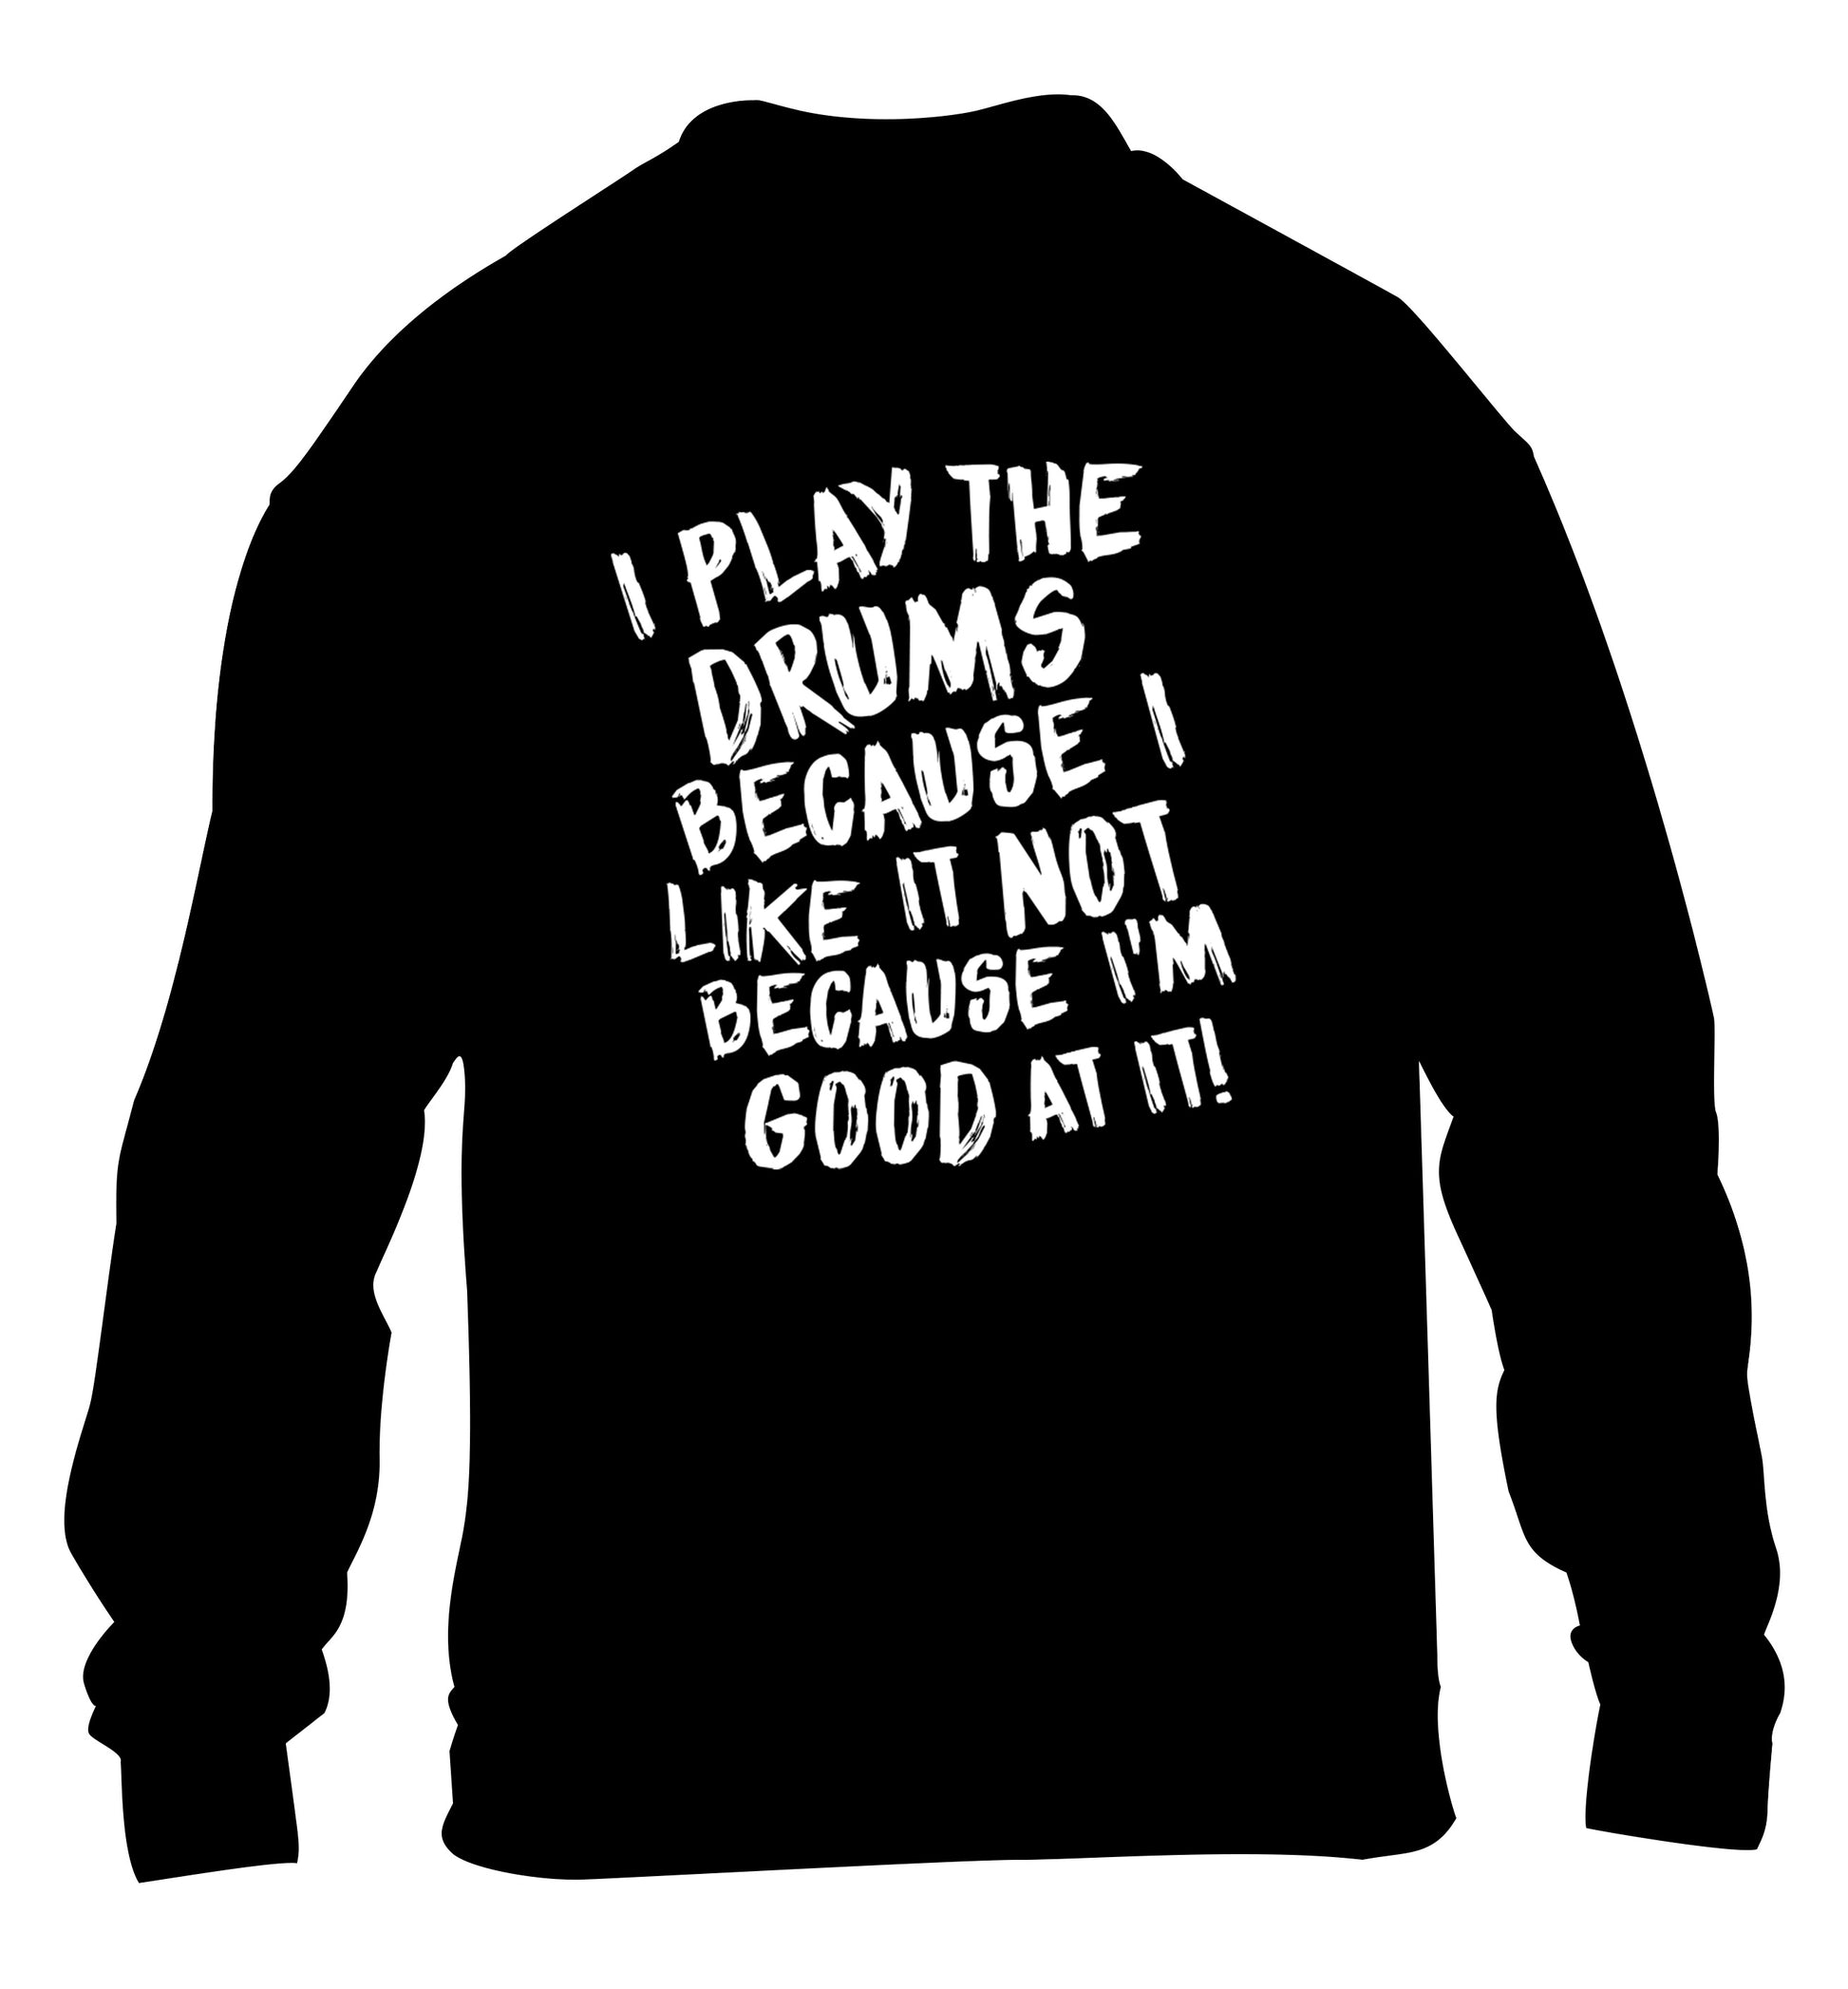 I play the drums because I like it not because I'm good at it children's black sweater 12-14 Years